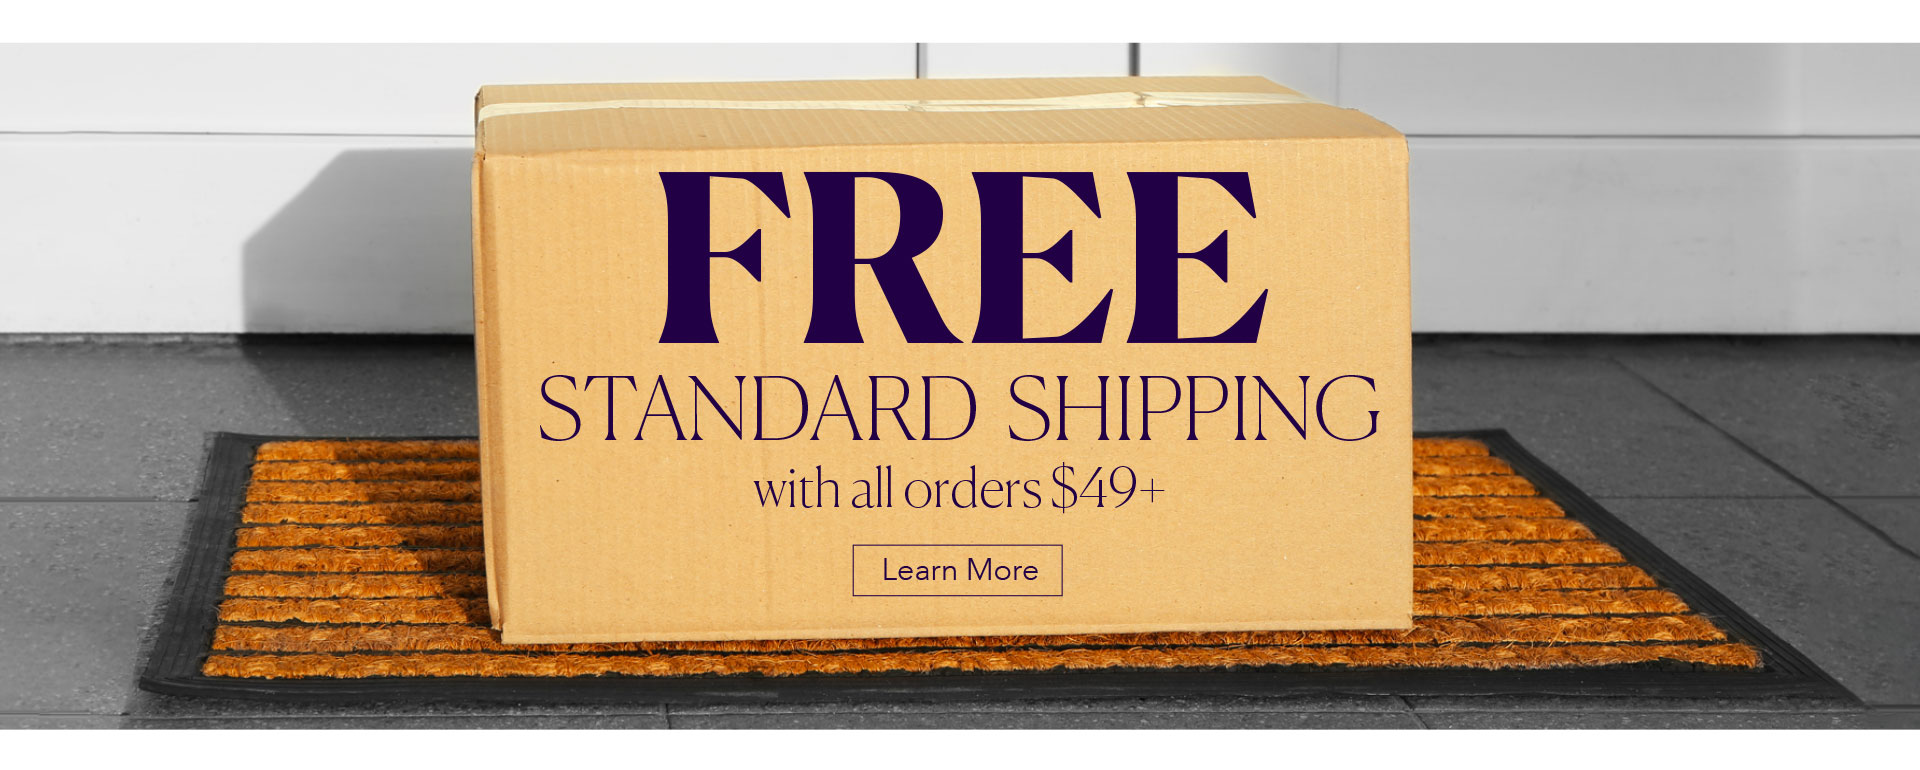 Free Standard shipping on all orders $49+